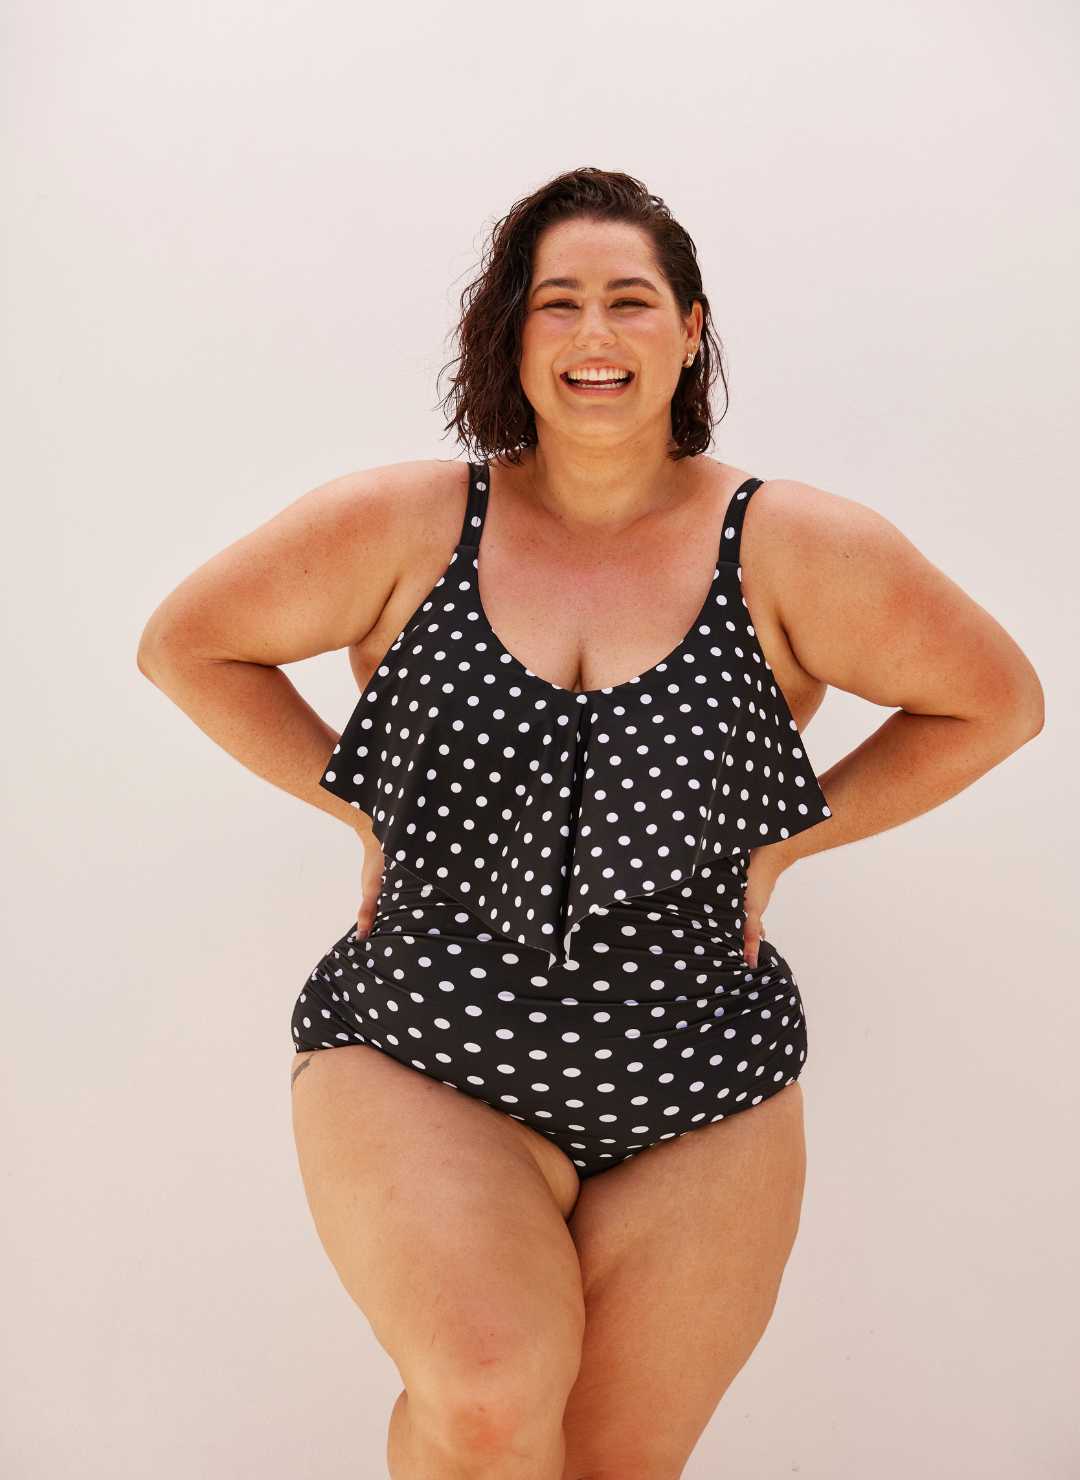 Swimsuits For Big Thighs Guide For Women In 2024 - Shop With Me Mama